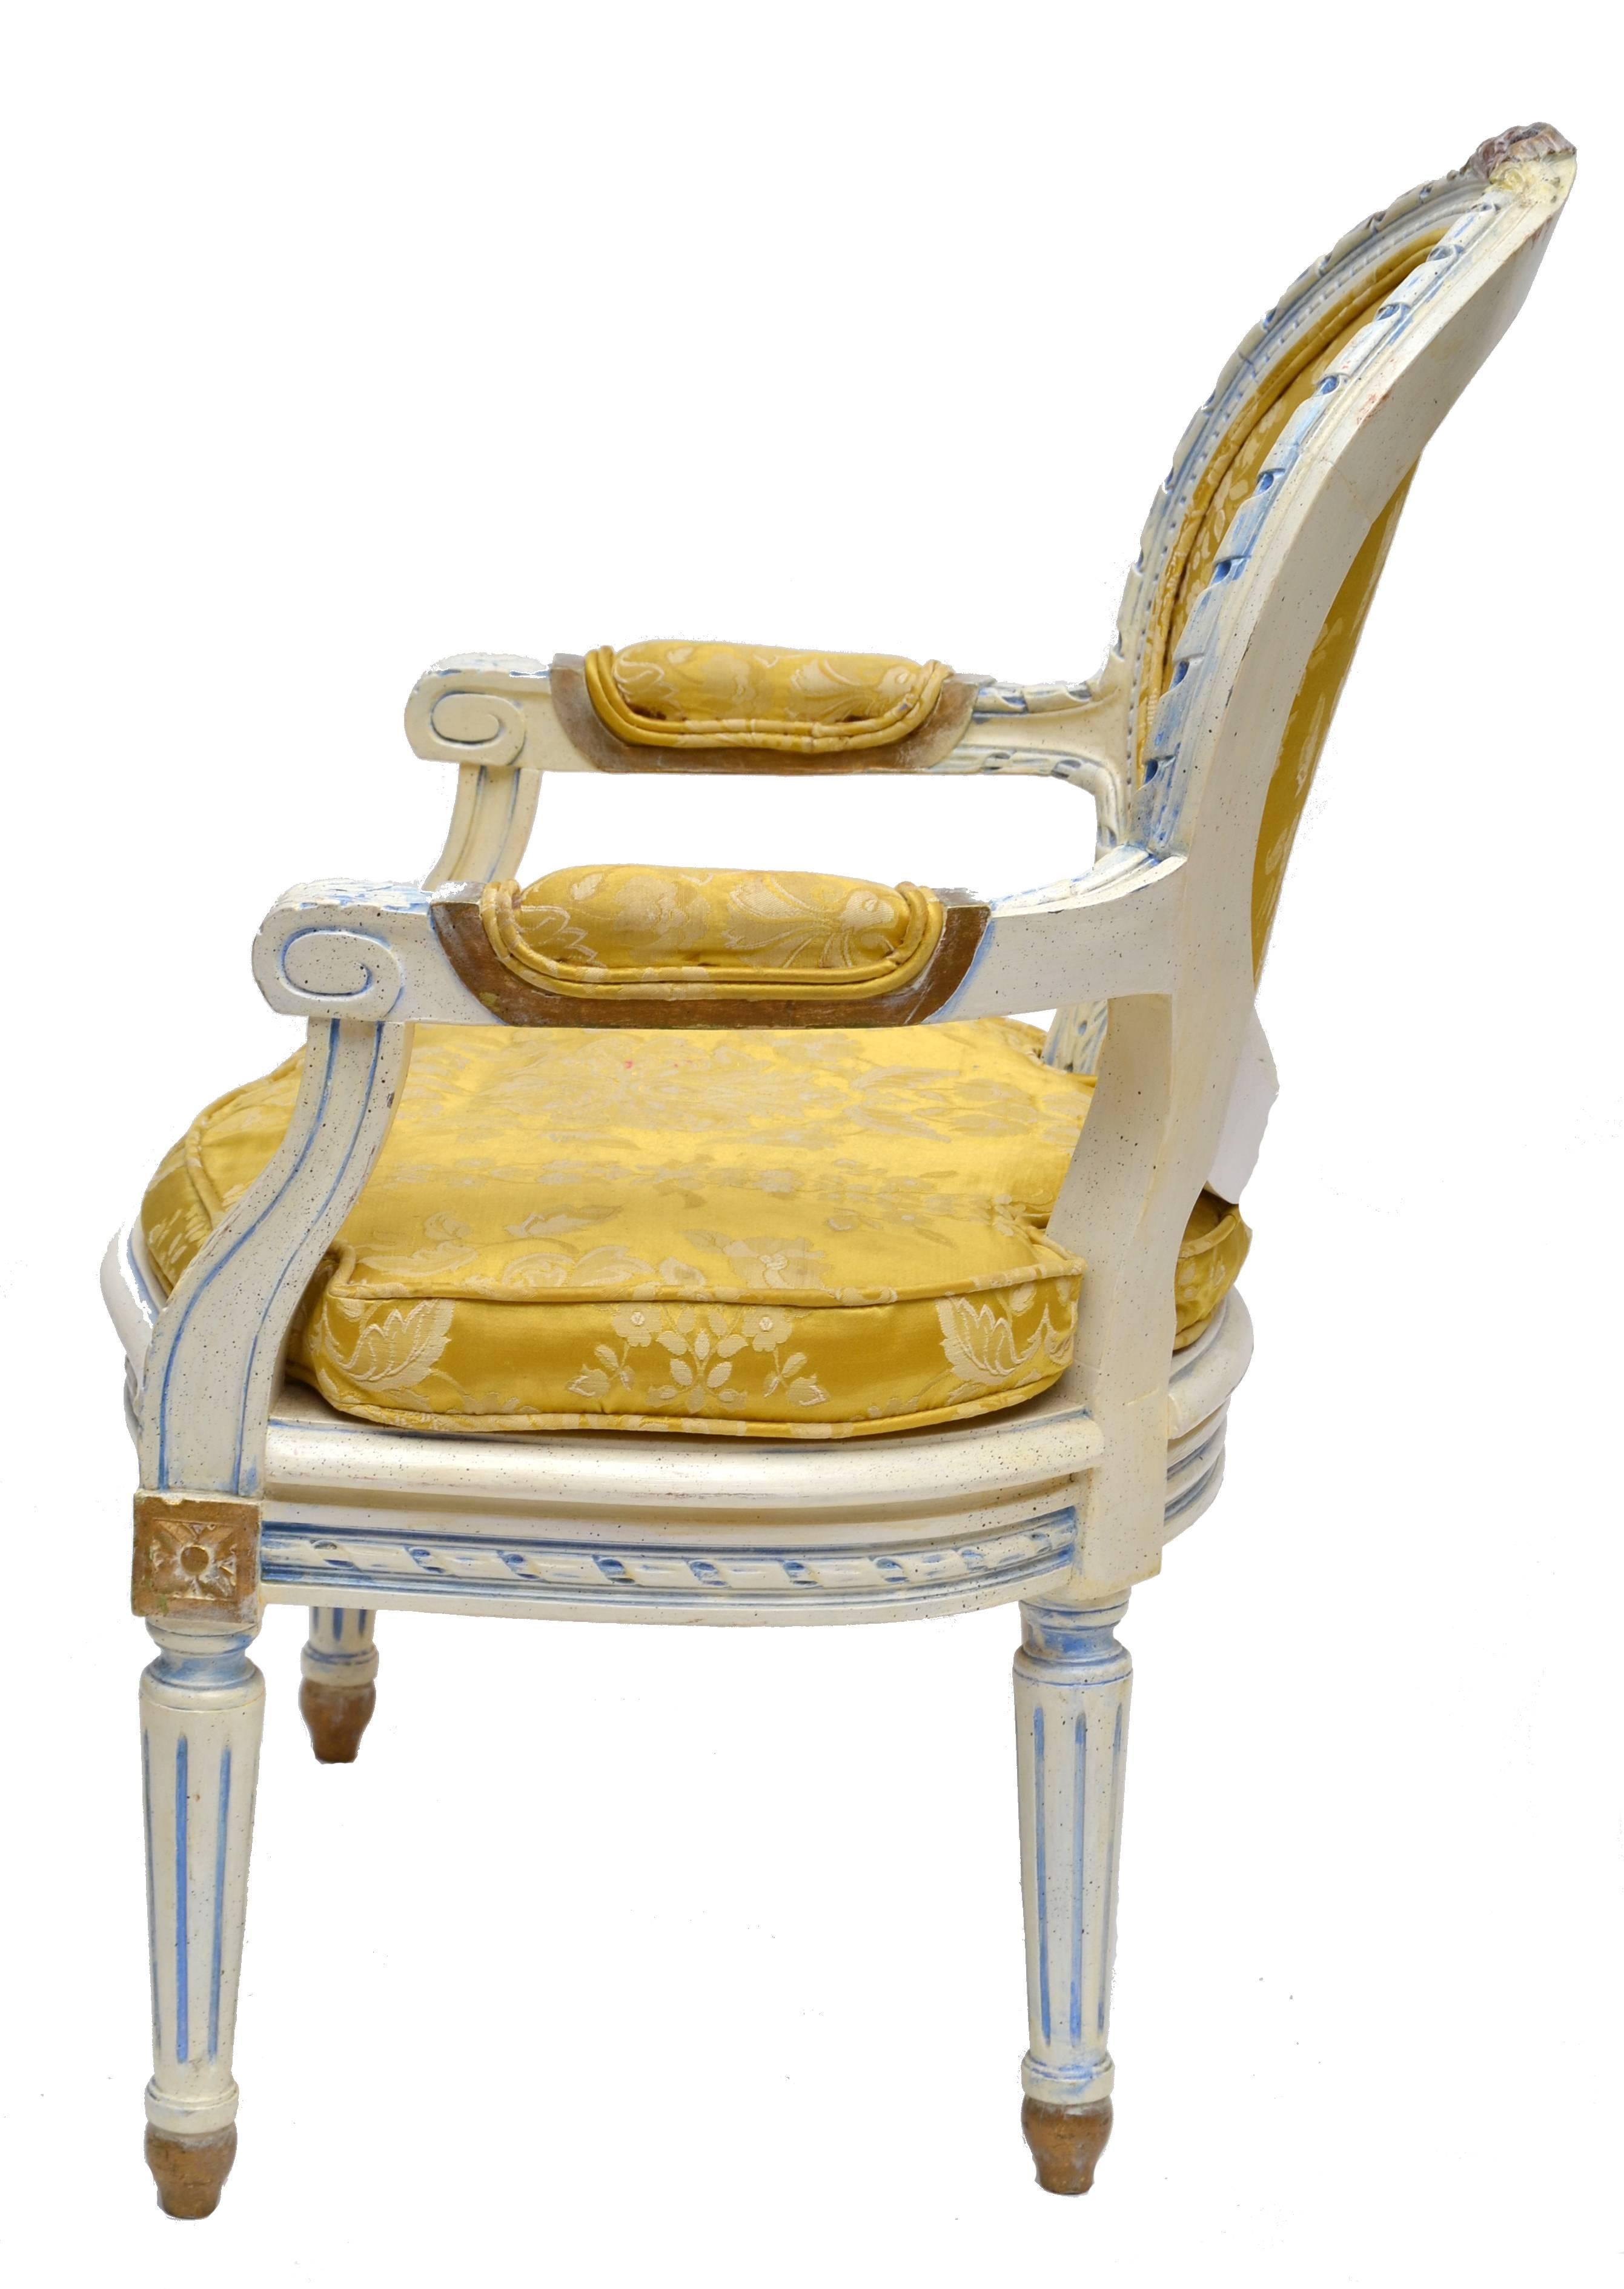 Cute French Louis XVI style children armchair.
The oval backs having foliate carved crests, over scrolled arms, rope twist carving, standing on turned, fluted and stop fluted legs standing on turned turnip feet.
The golden upholstery is a great